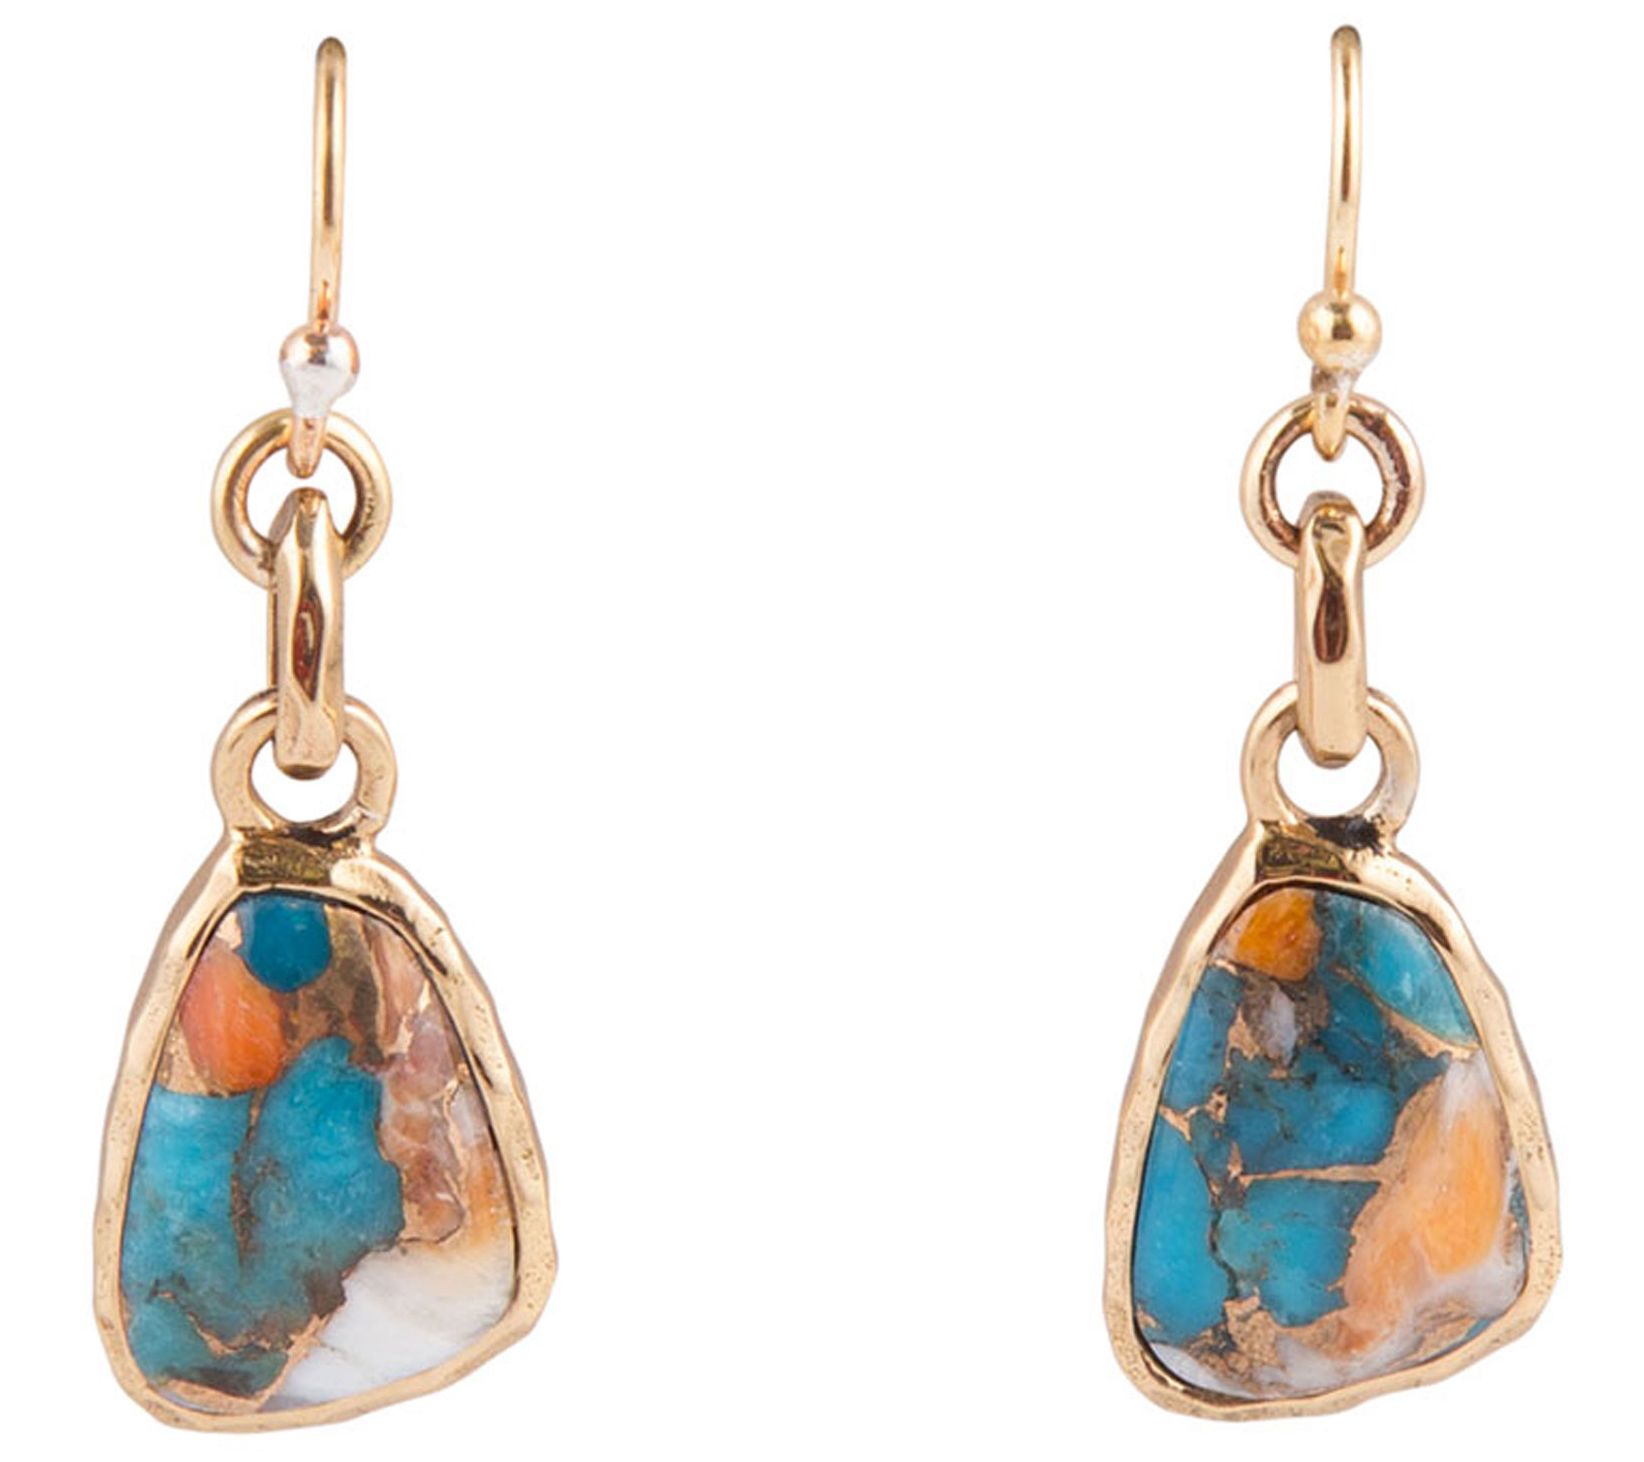 Barse Composite Turquoise w/ Infused Metal M atix Earrings - QVC.com